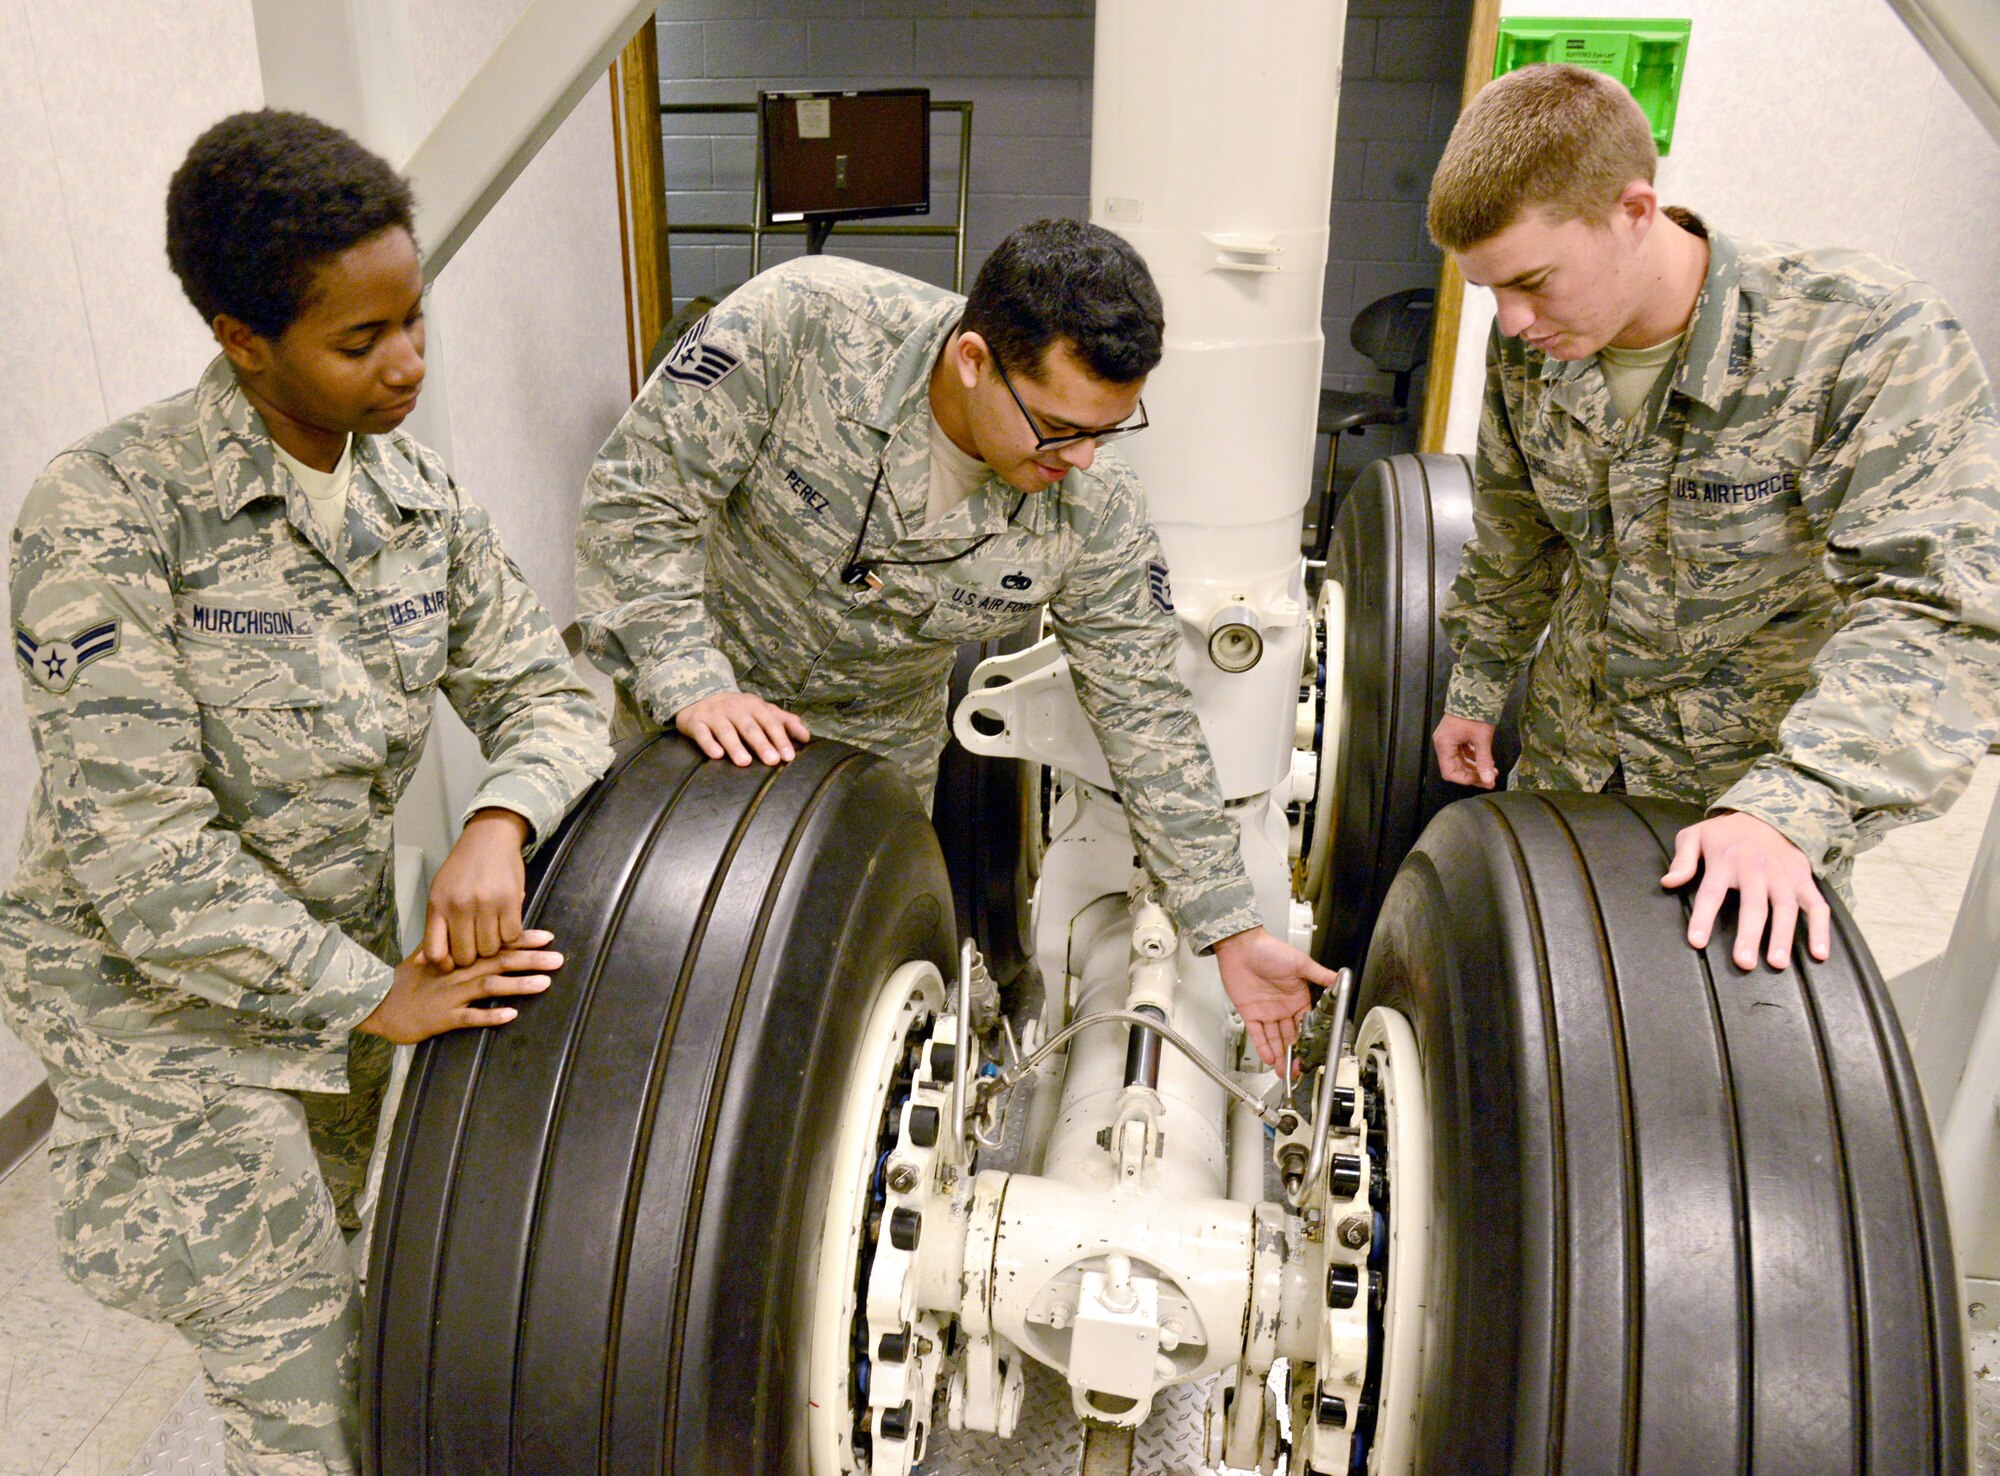 Tech. Sgt. Jorge Perez, center, an instructor with the 373rd Training Reserve Squadron, quizzes Airman 1st Class Basha Murchison, left, and Airman Basic Jacob King about hydraulic lines in the brakes on an E-3 landing gear. Having training equipment of actual aircraft parts available in the 373rd TRS gives students a hands-on learning experience. (Air Force photo by Kelly White/Released)
